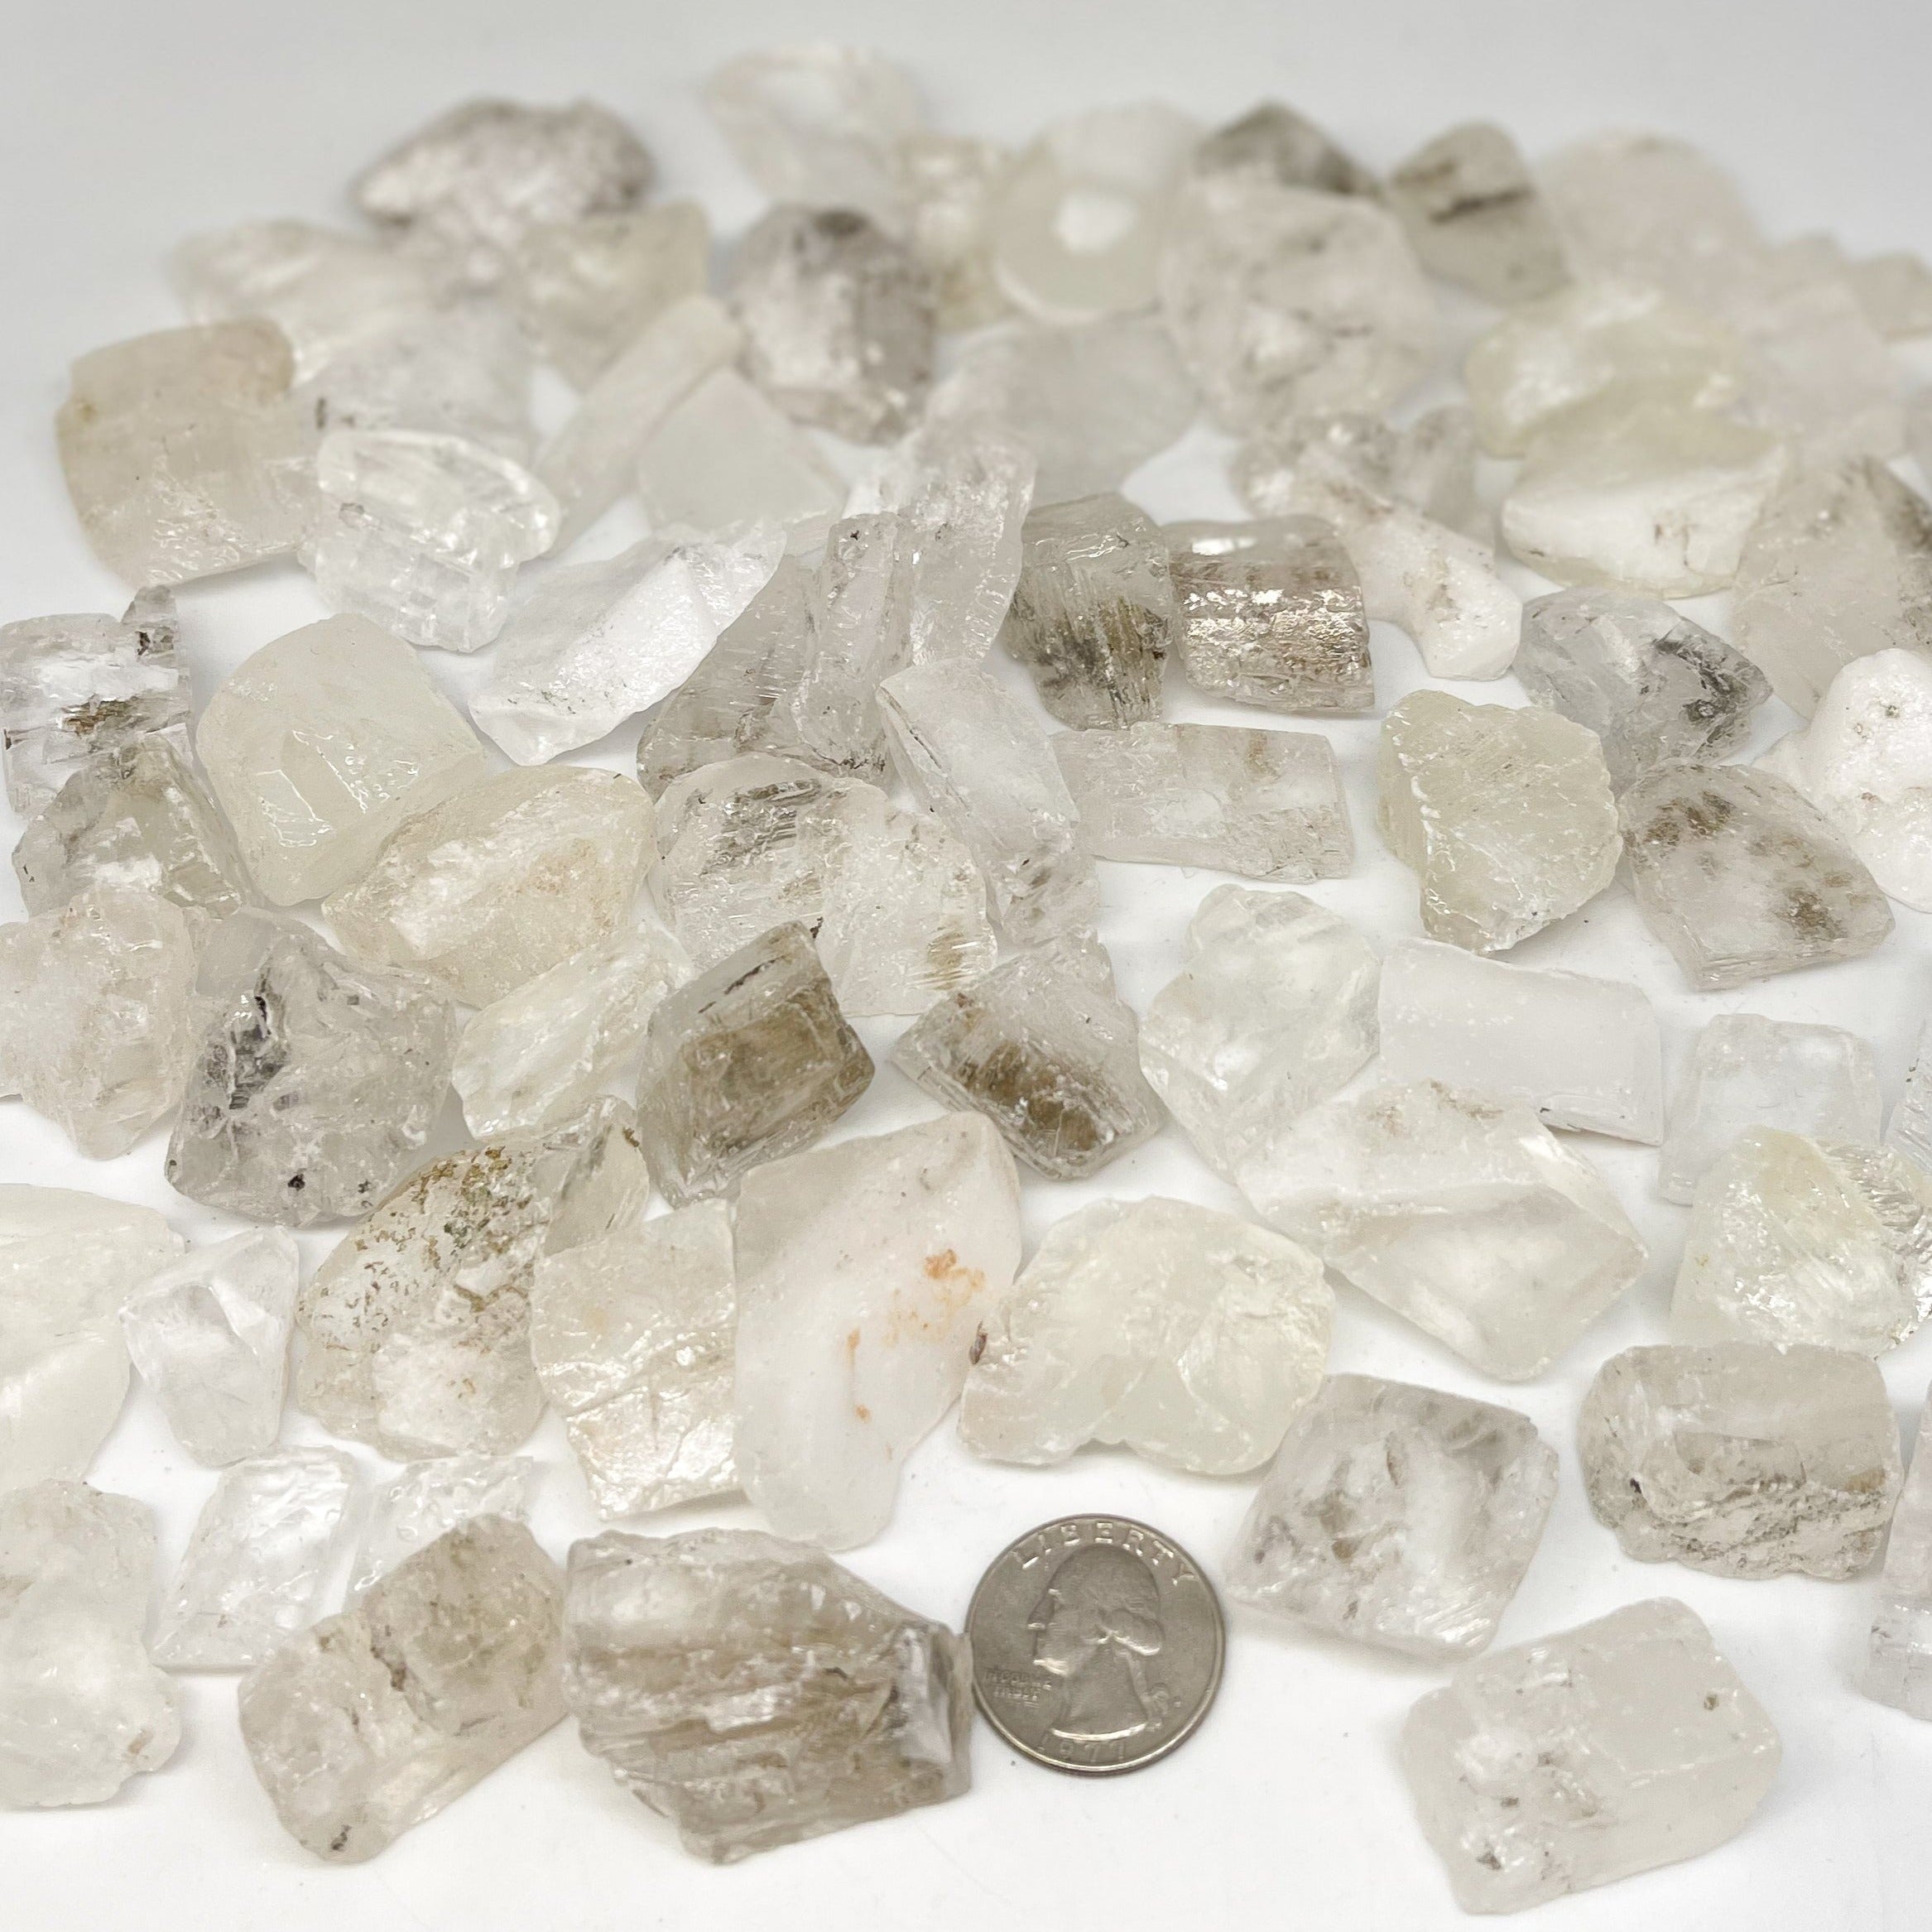 Clear (Optical) Calcite Crystal | Wholesale